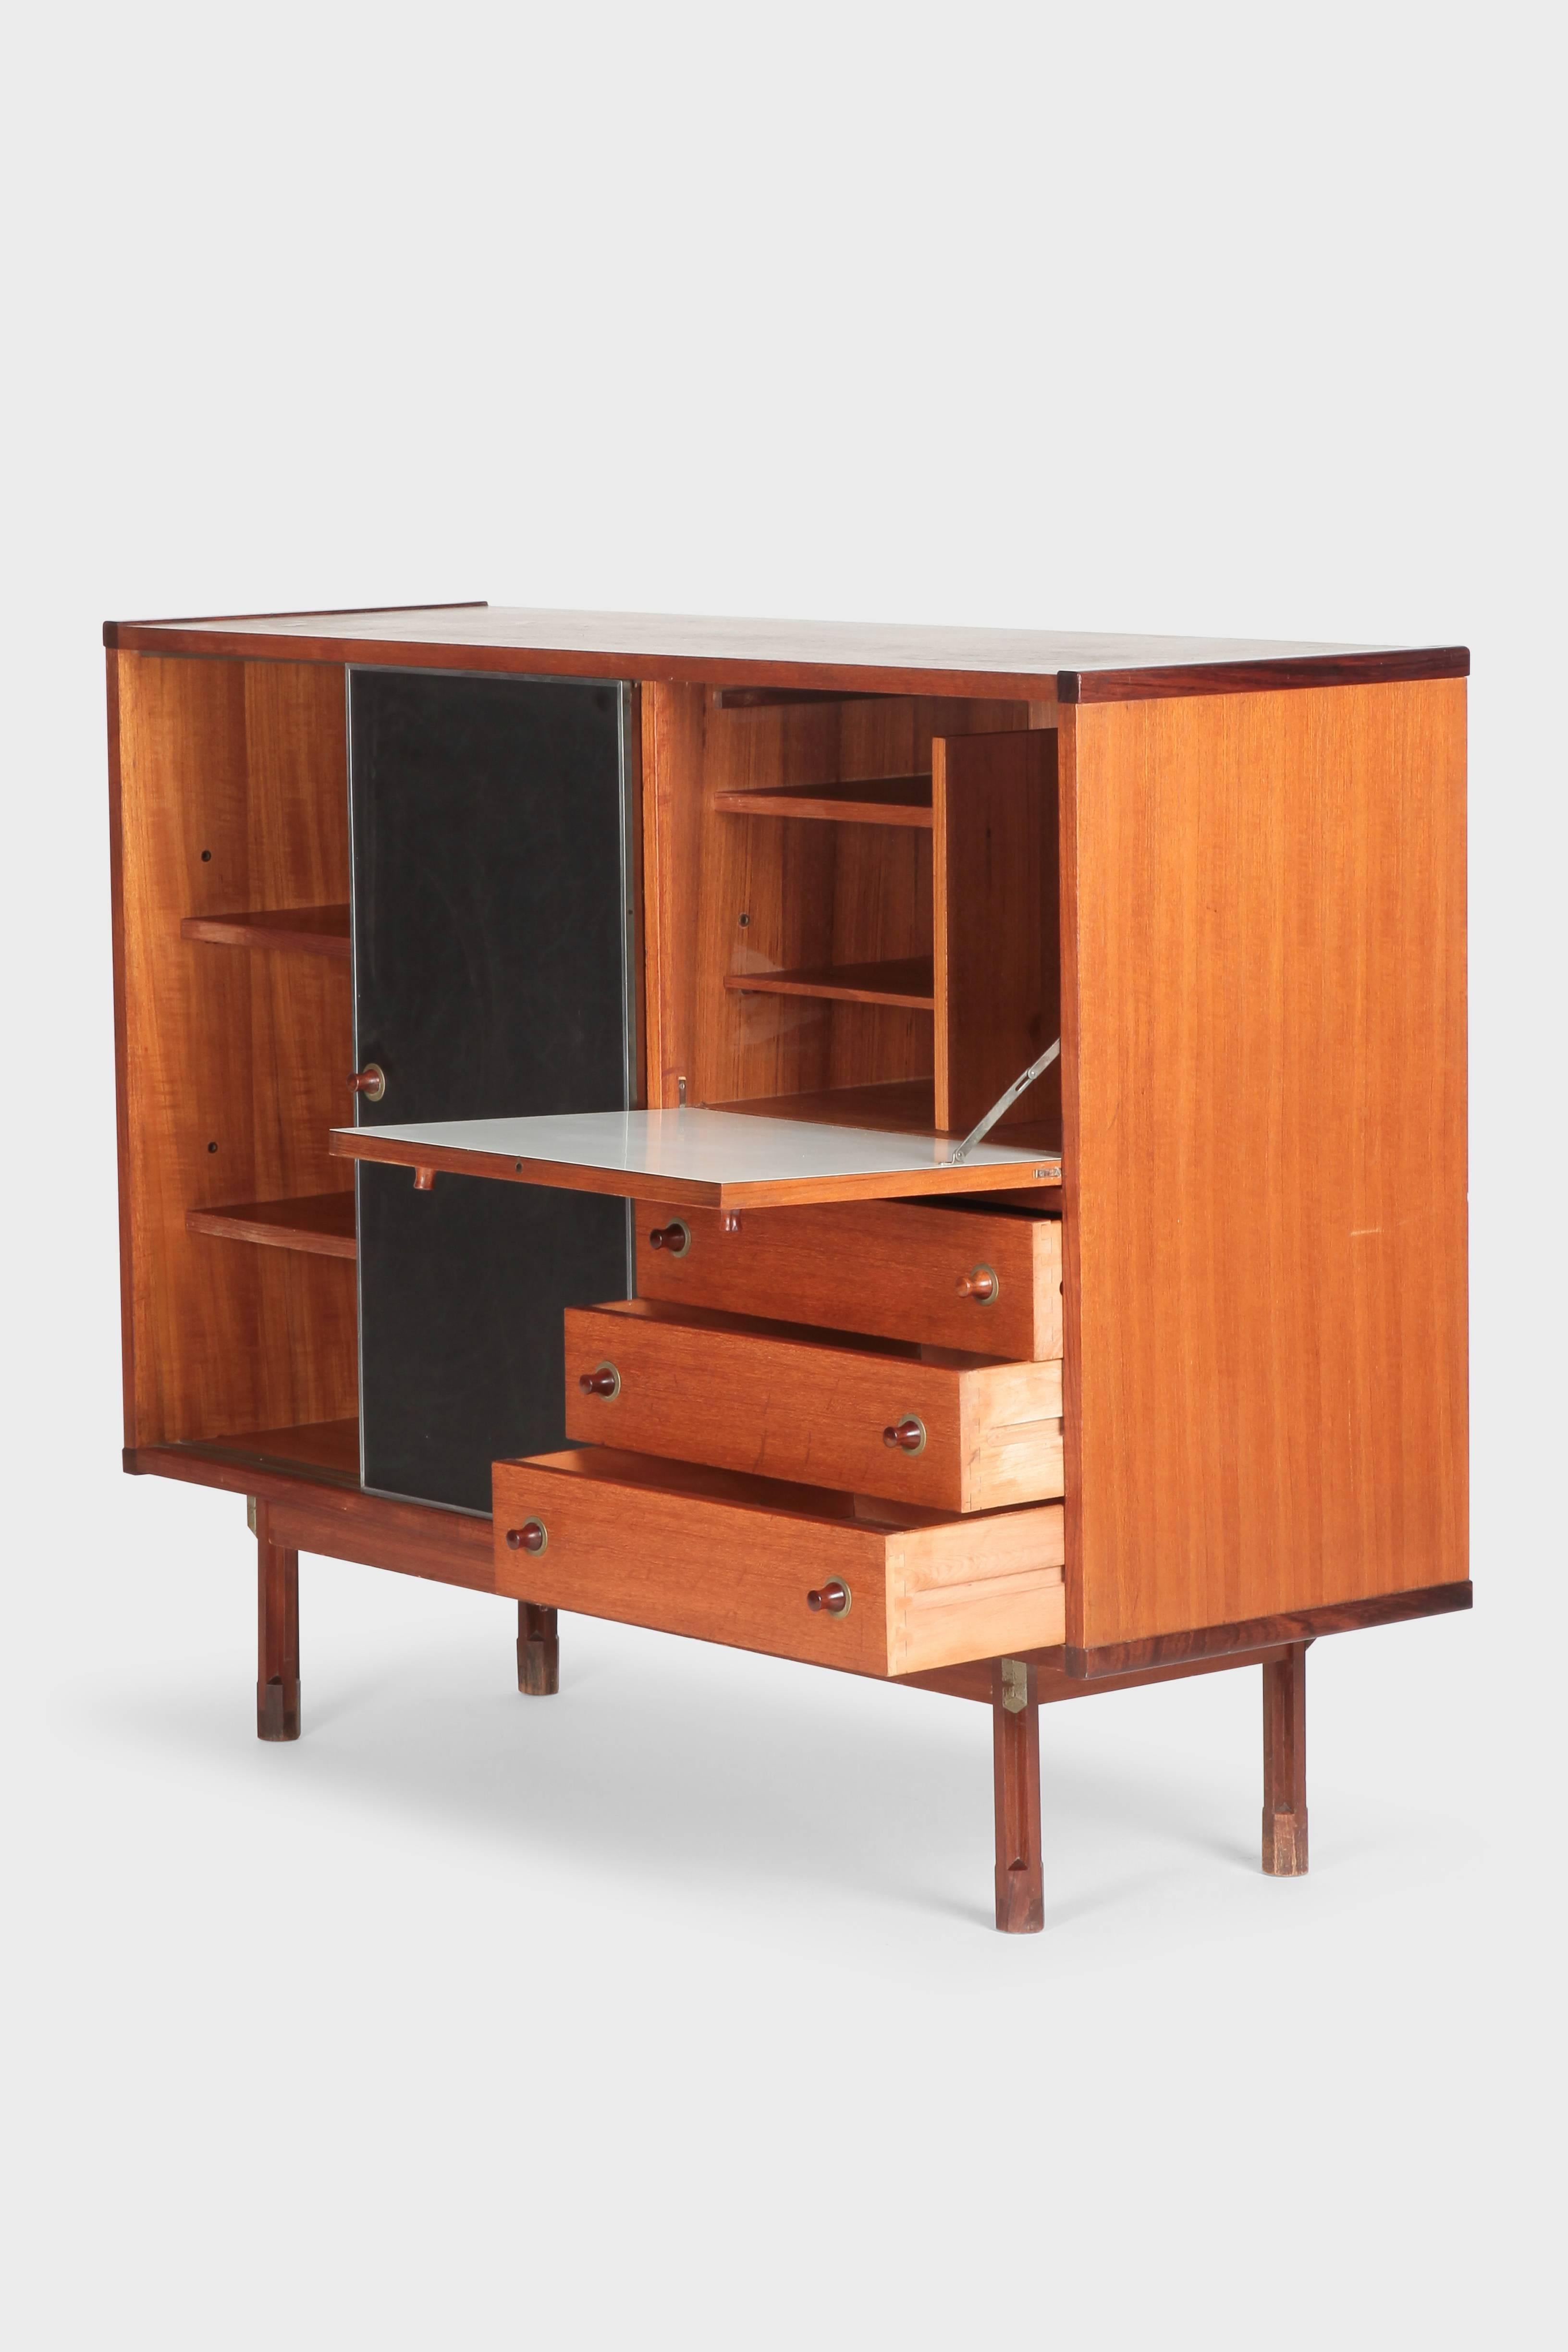 Ico Parisi highboard manufactured by Stildomus in the 1960s in Italy. Very varied teak highboard. Rosewood details like handles, feet and edges. Black plastic sliding doors framed with aluminium. The inside of the hinged door is covered with white